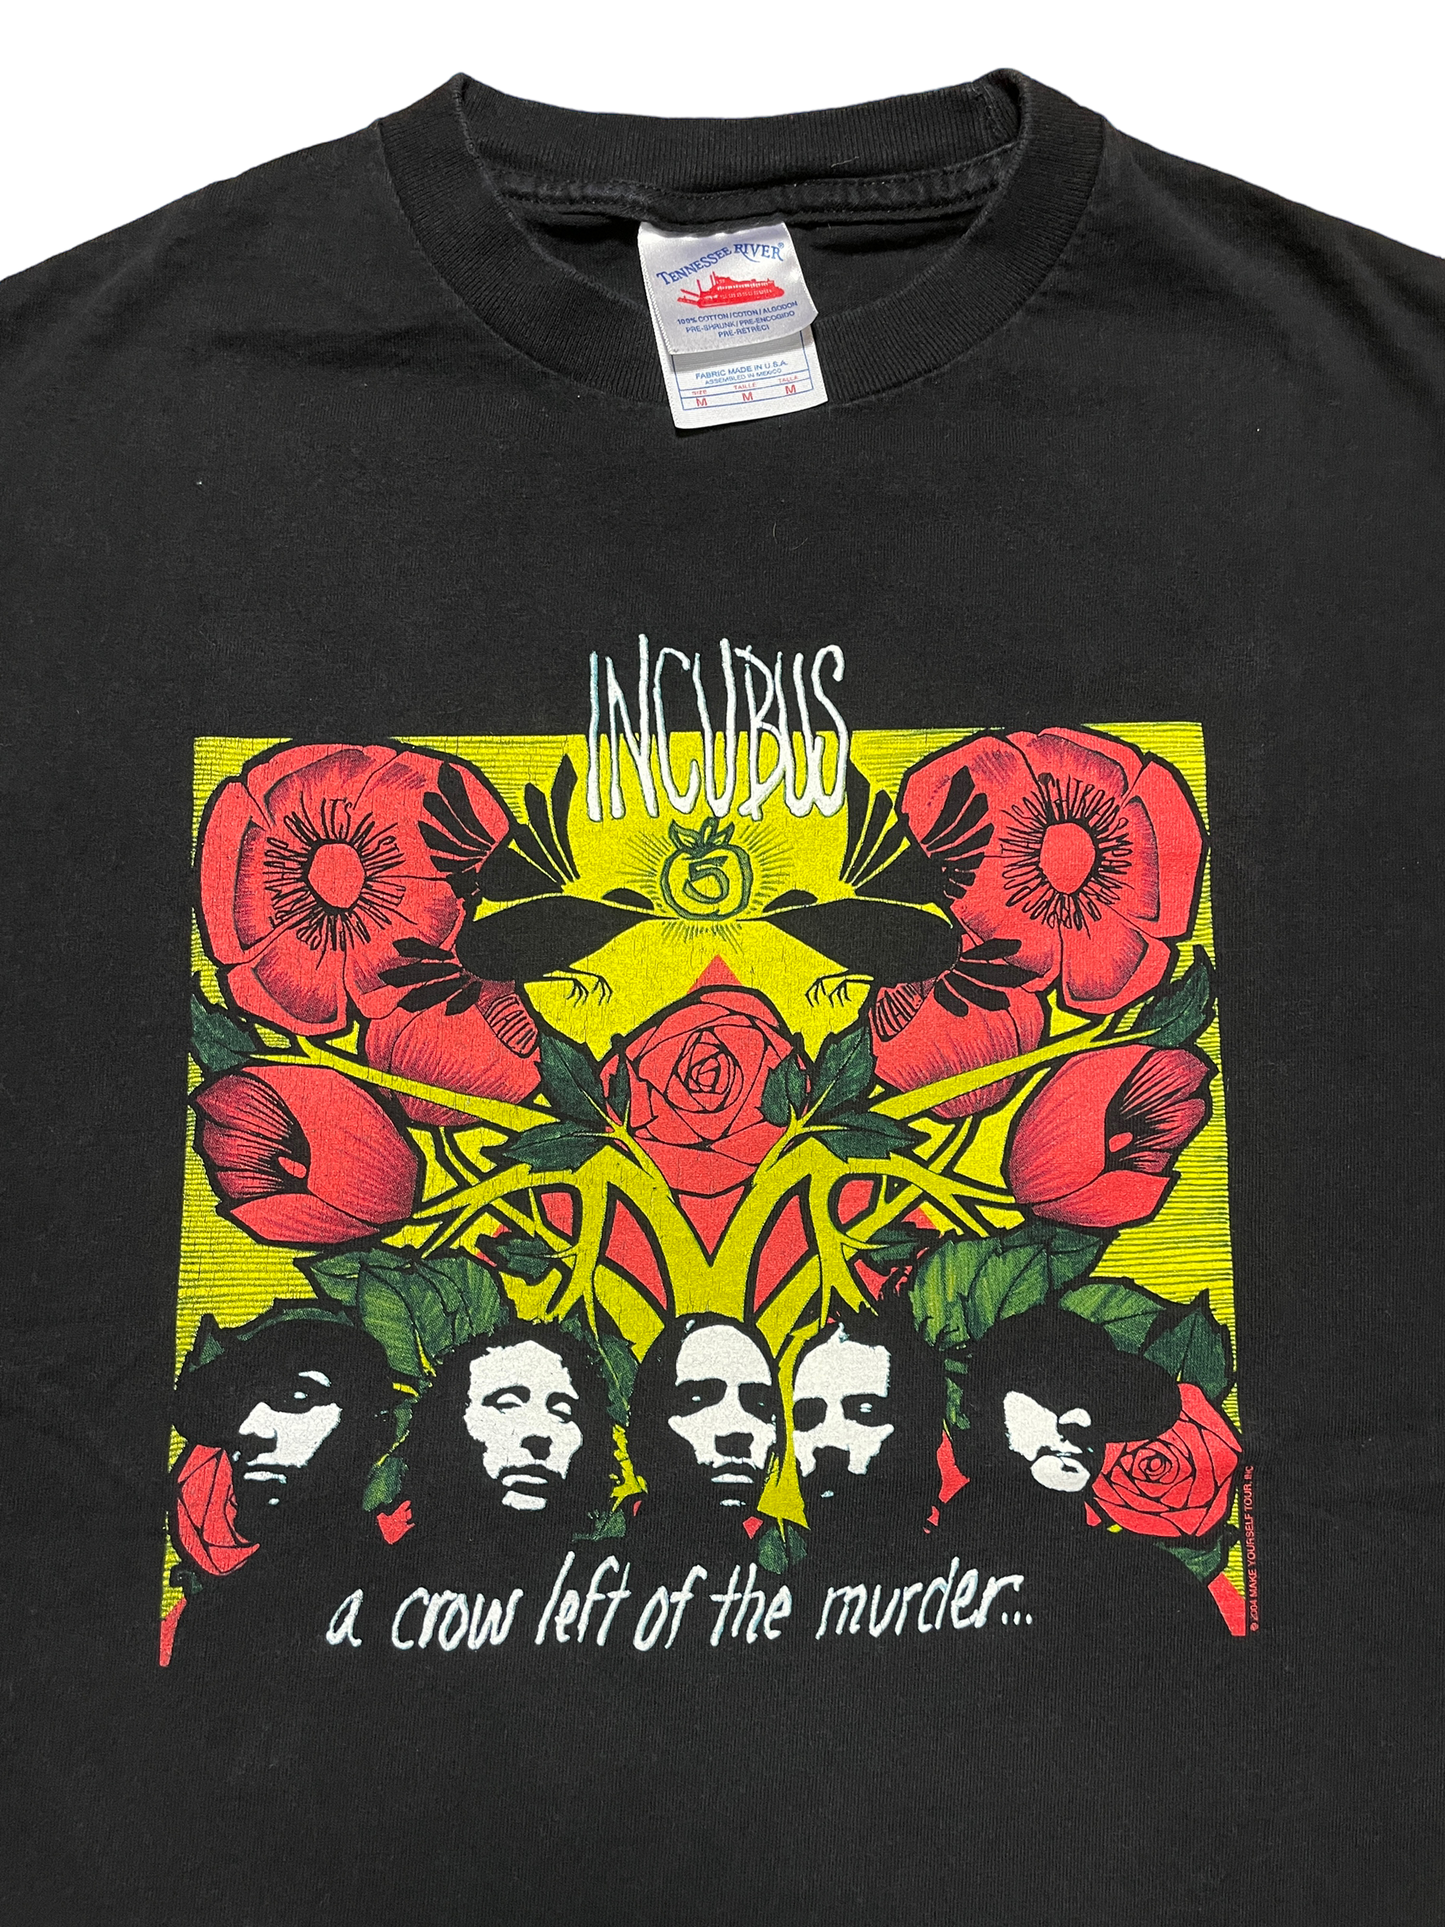 2004 Incubus "A Crow Left of the Murderer" Graphic Tee